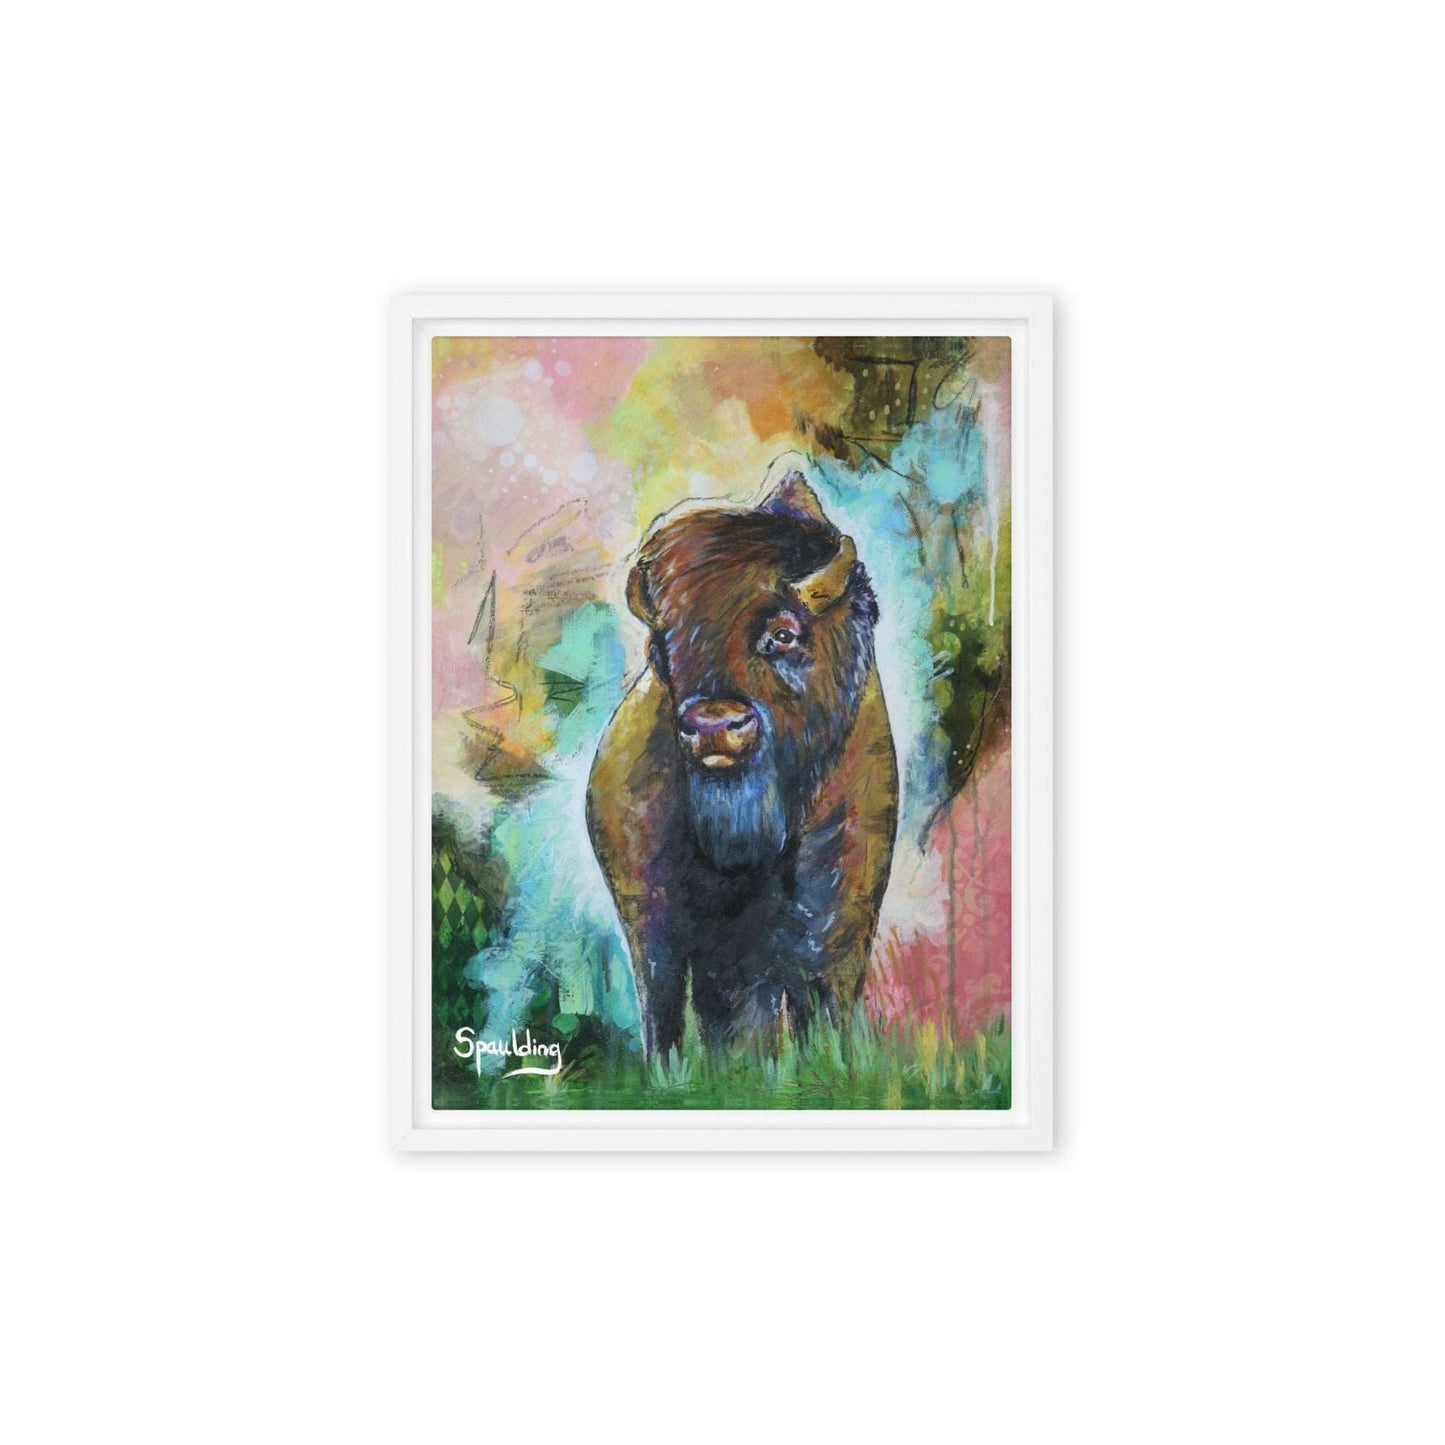 Framed canvas print with a bison standing in grass with a pink, yellow, green, teal color scheme background.